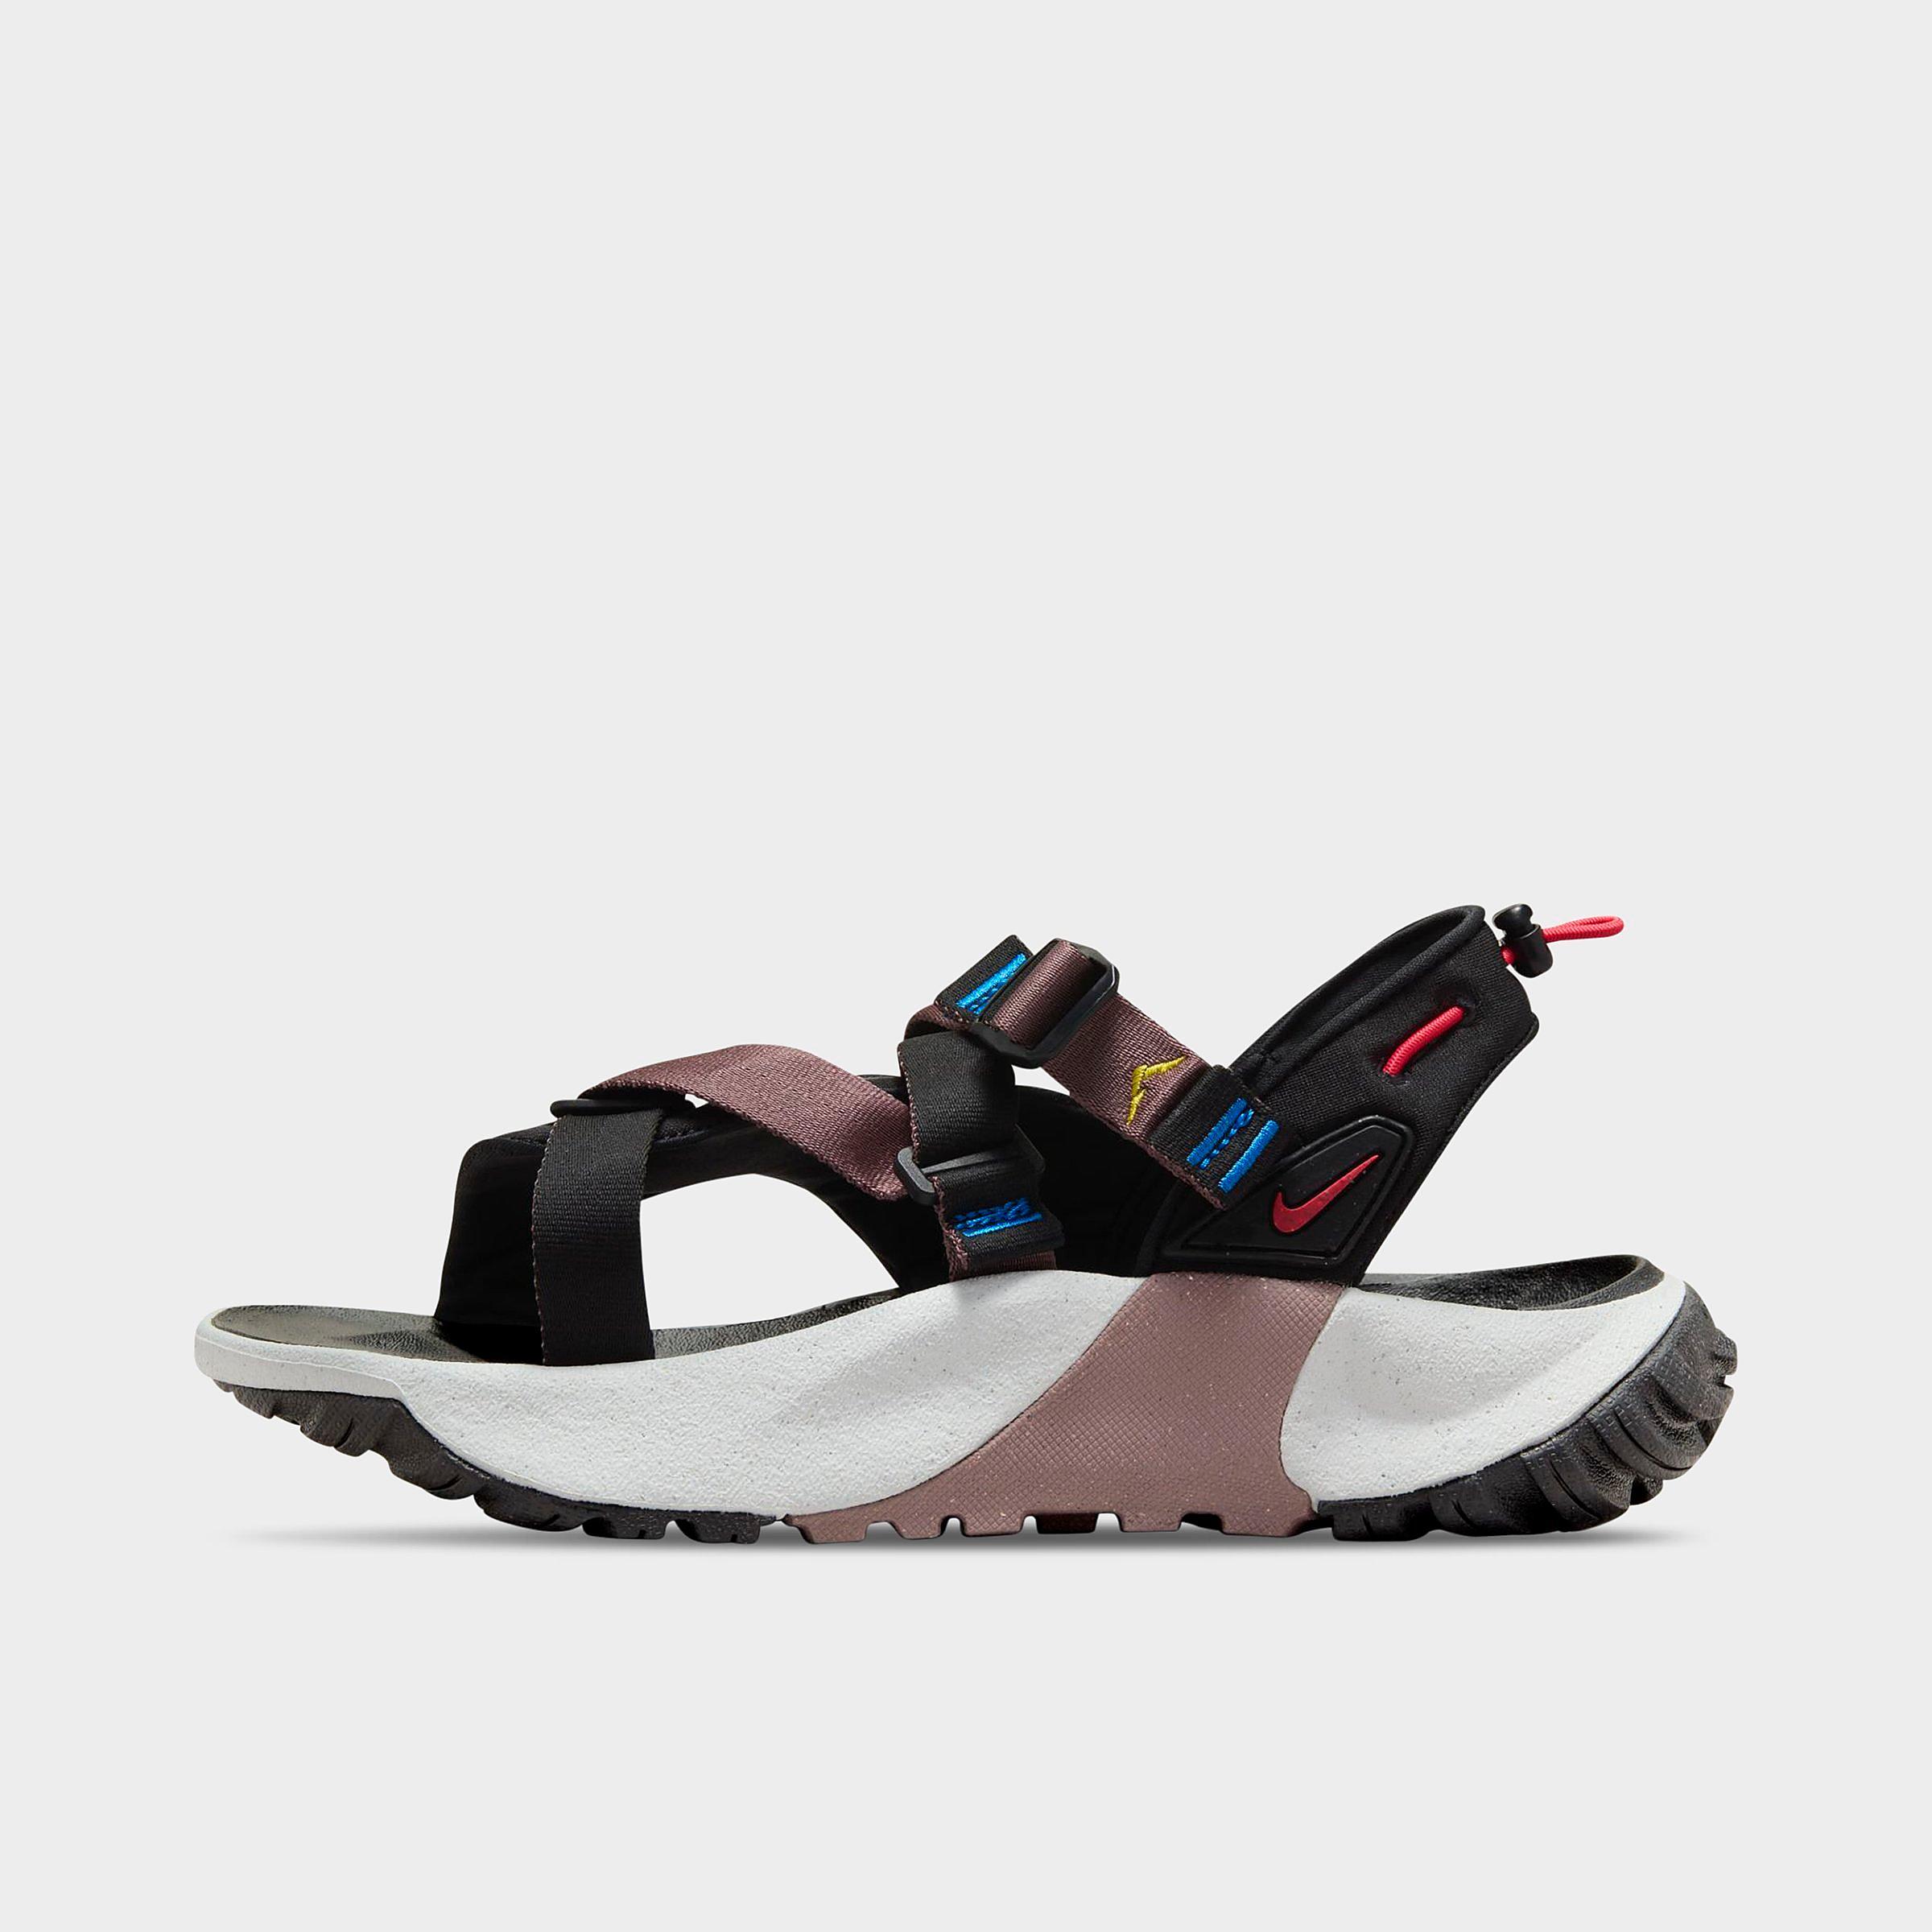 Mens Nike Oneonta Sandals